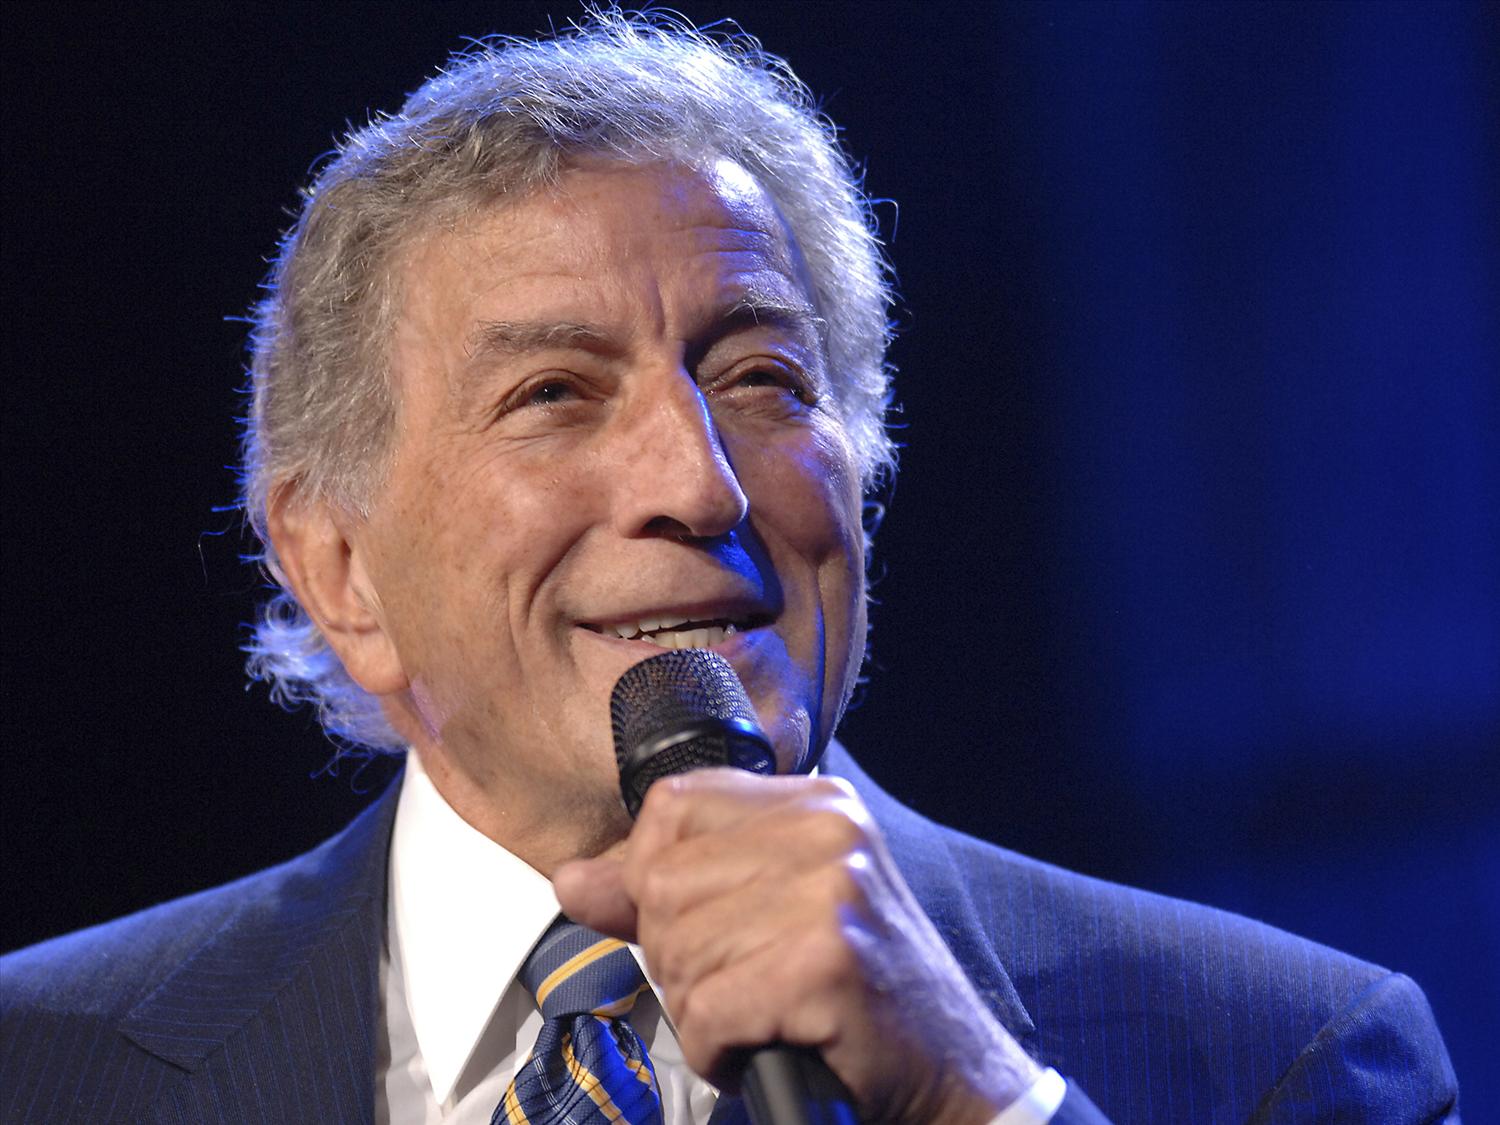 Tony Bennett’s life wasn’t just singing; he marched along with King, Belafonte for civil rights